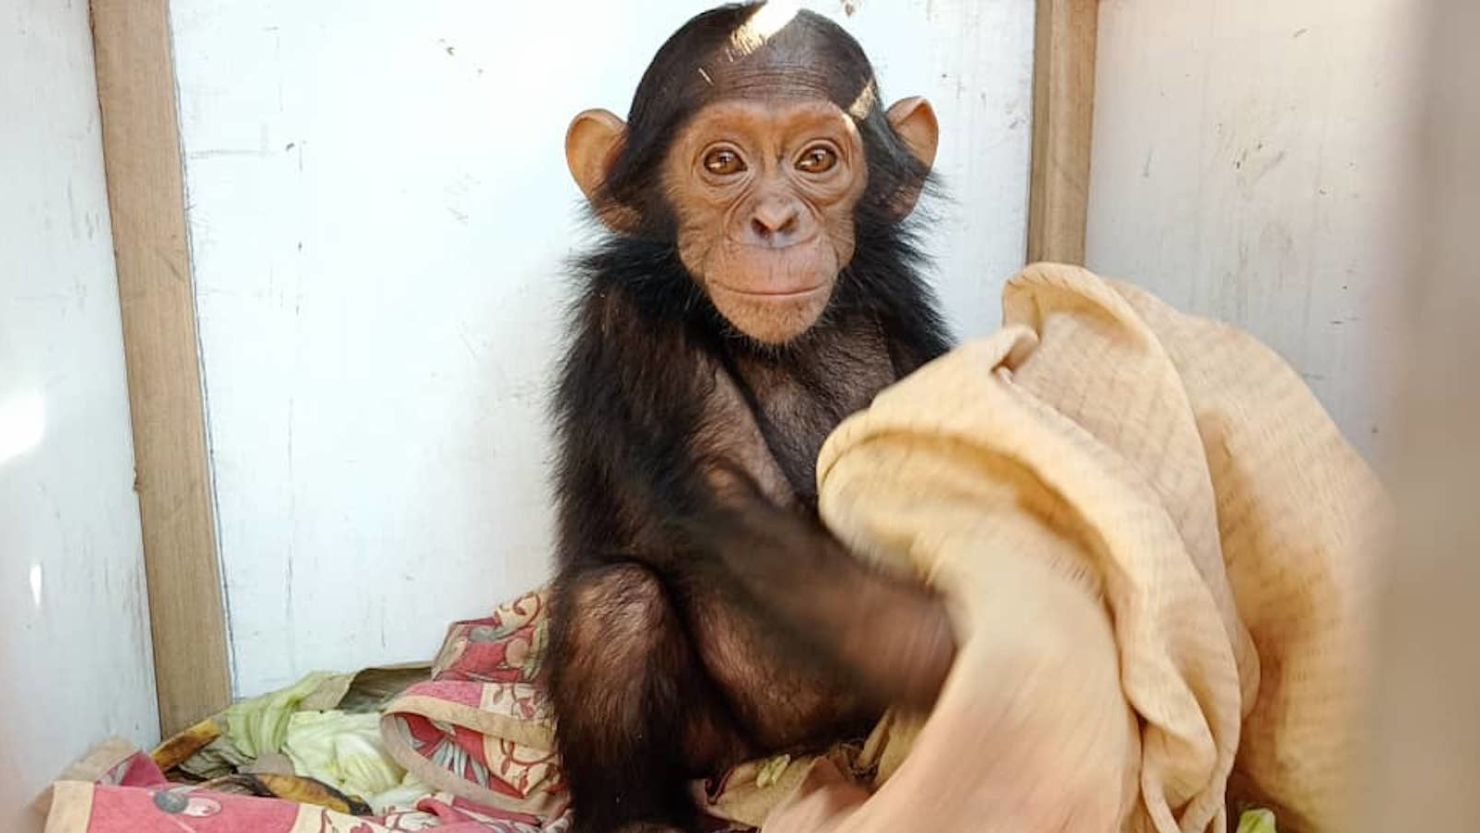 César, one of the baby chimpanzees abducted on September 9